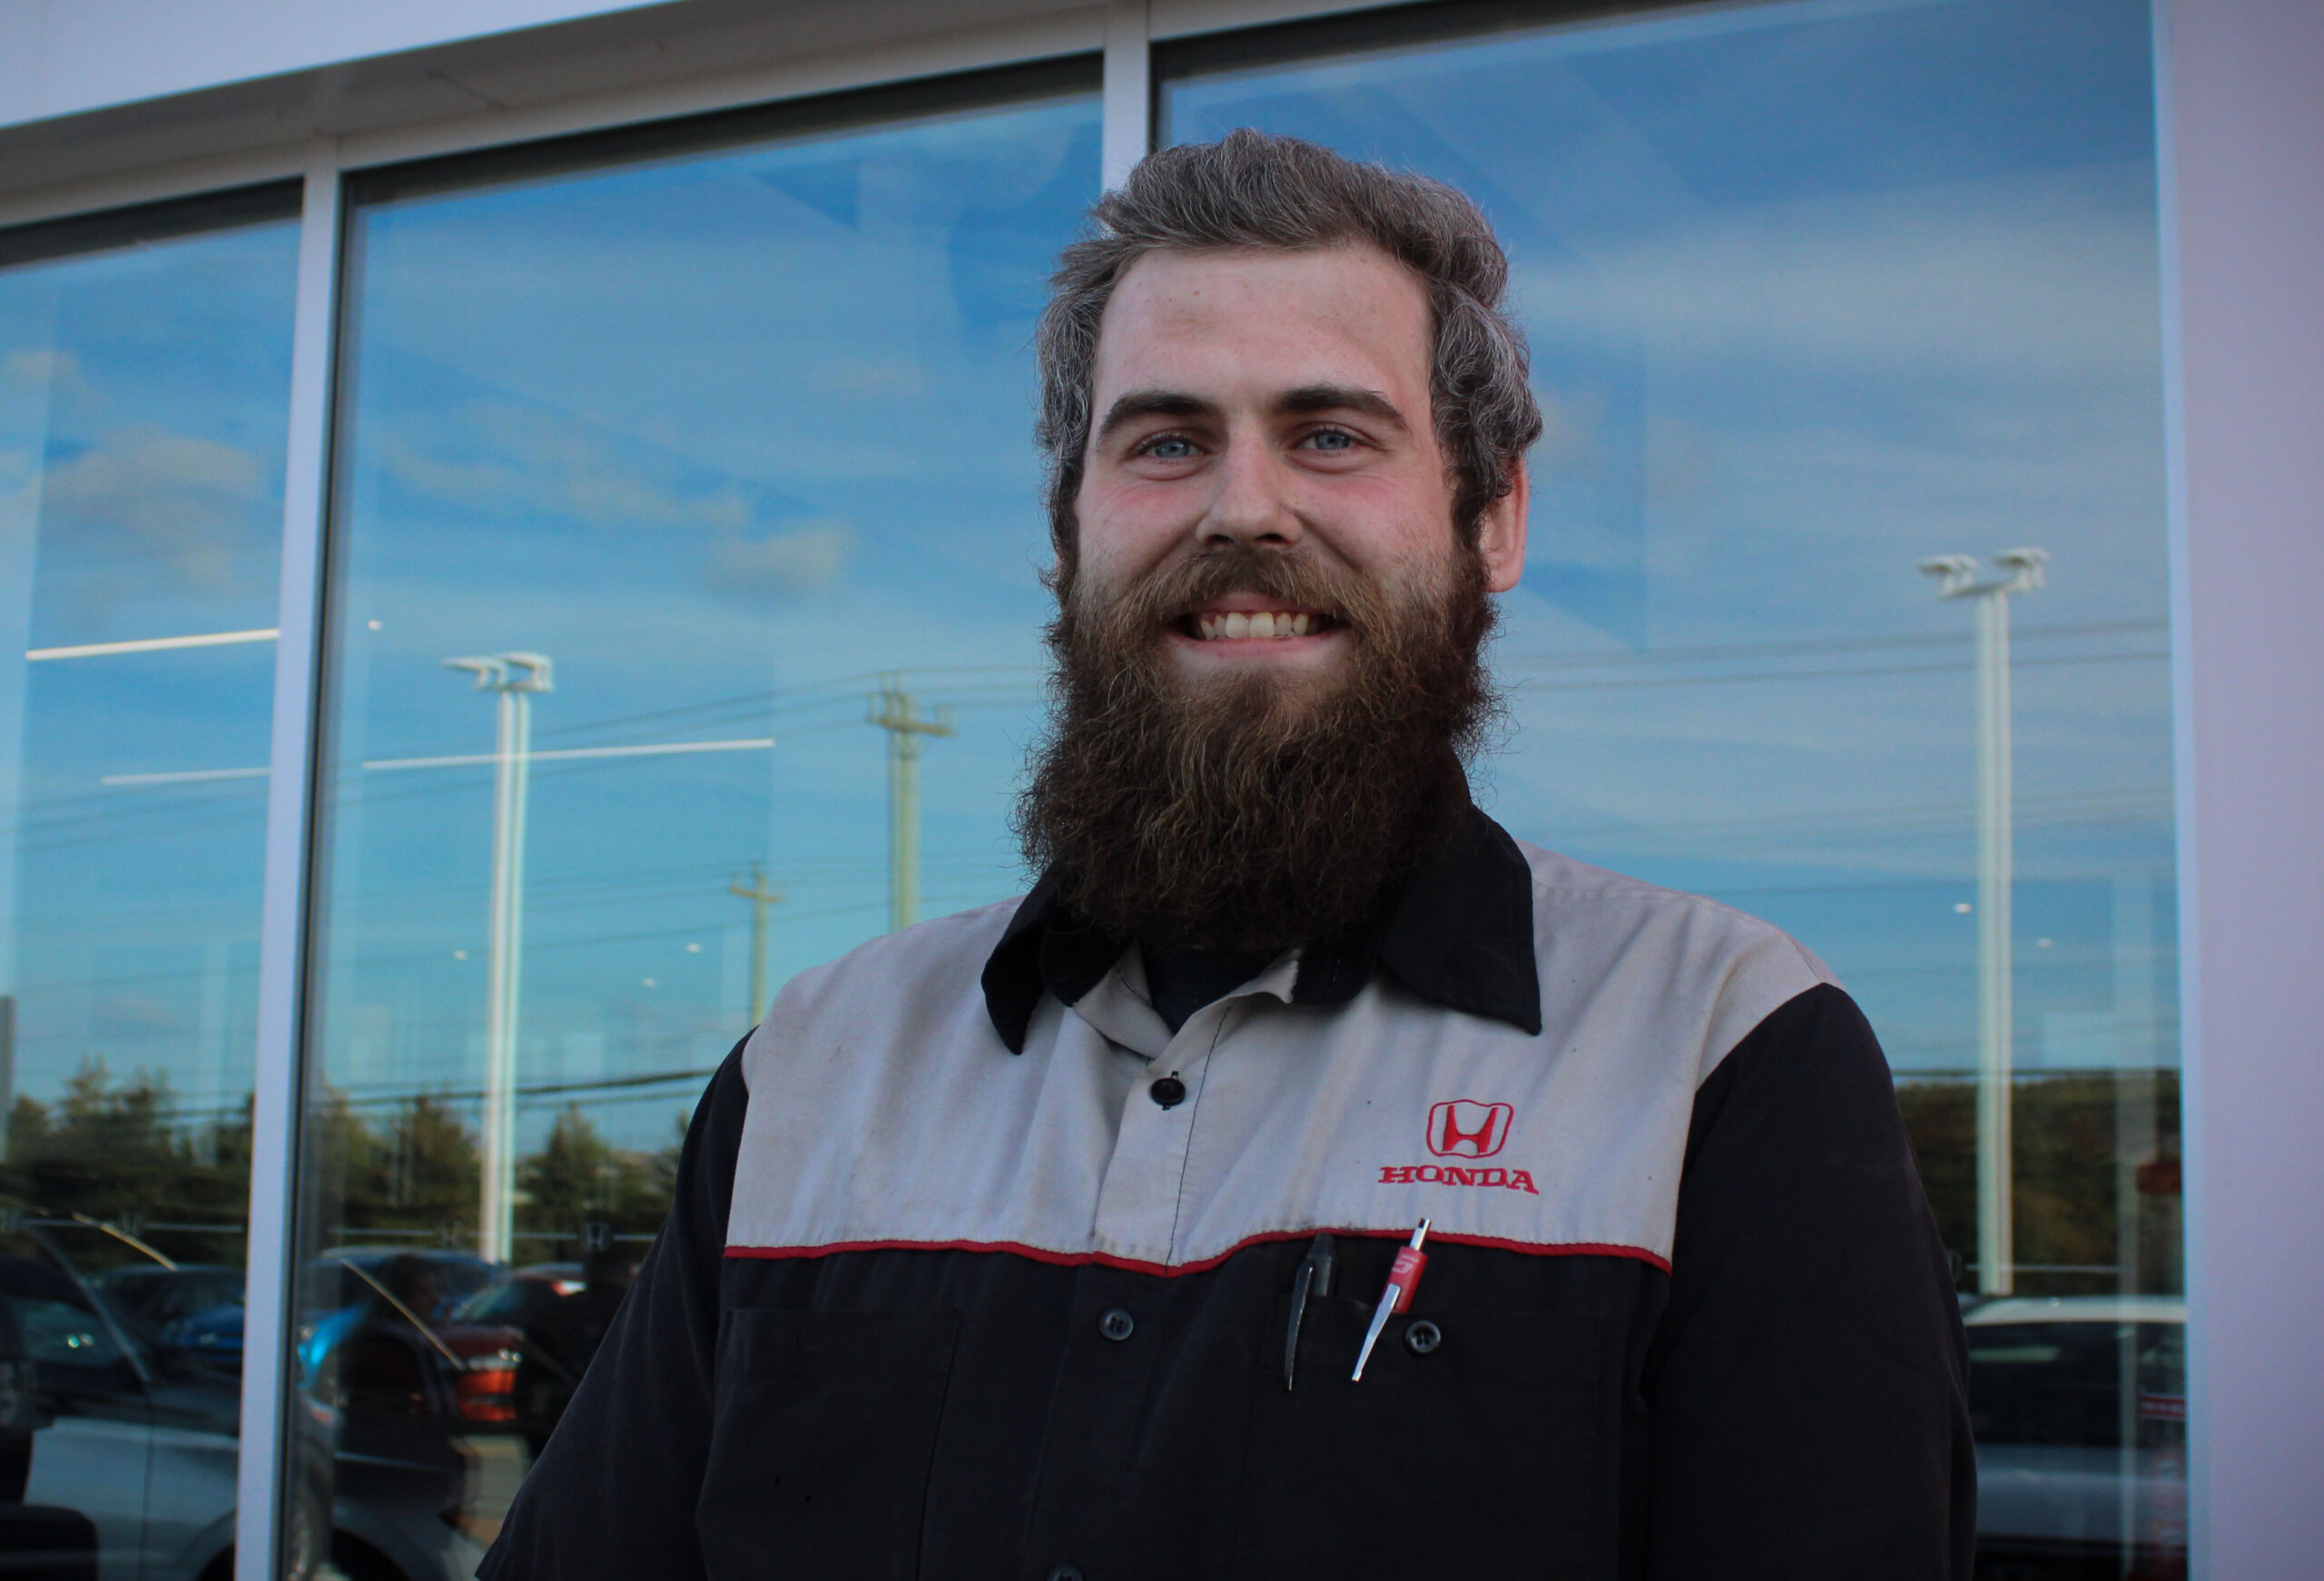 A mechanic in black and grey Steele Honda uniform stands infant of a glass building smiling at the camera. He said a long beard as well.